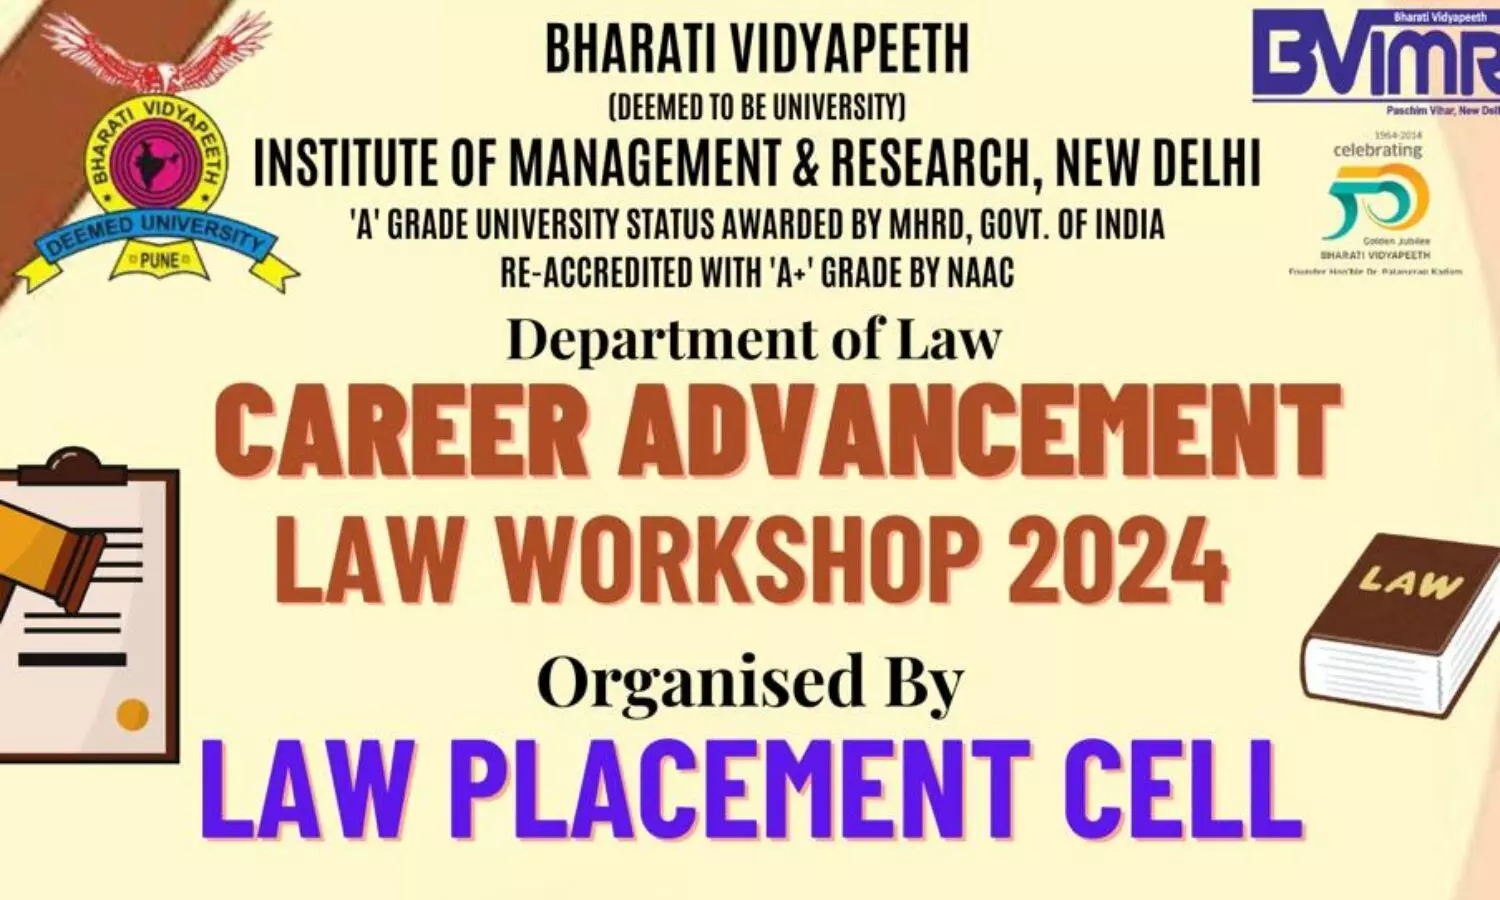 Career Advancement Law Workshop 2024 by Bharati Vidyapeeth Institute of Management & Research, New Delhi